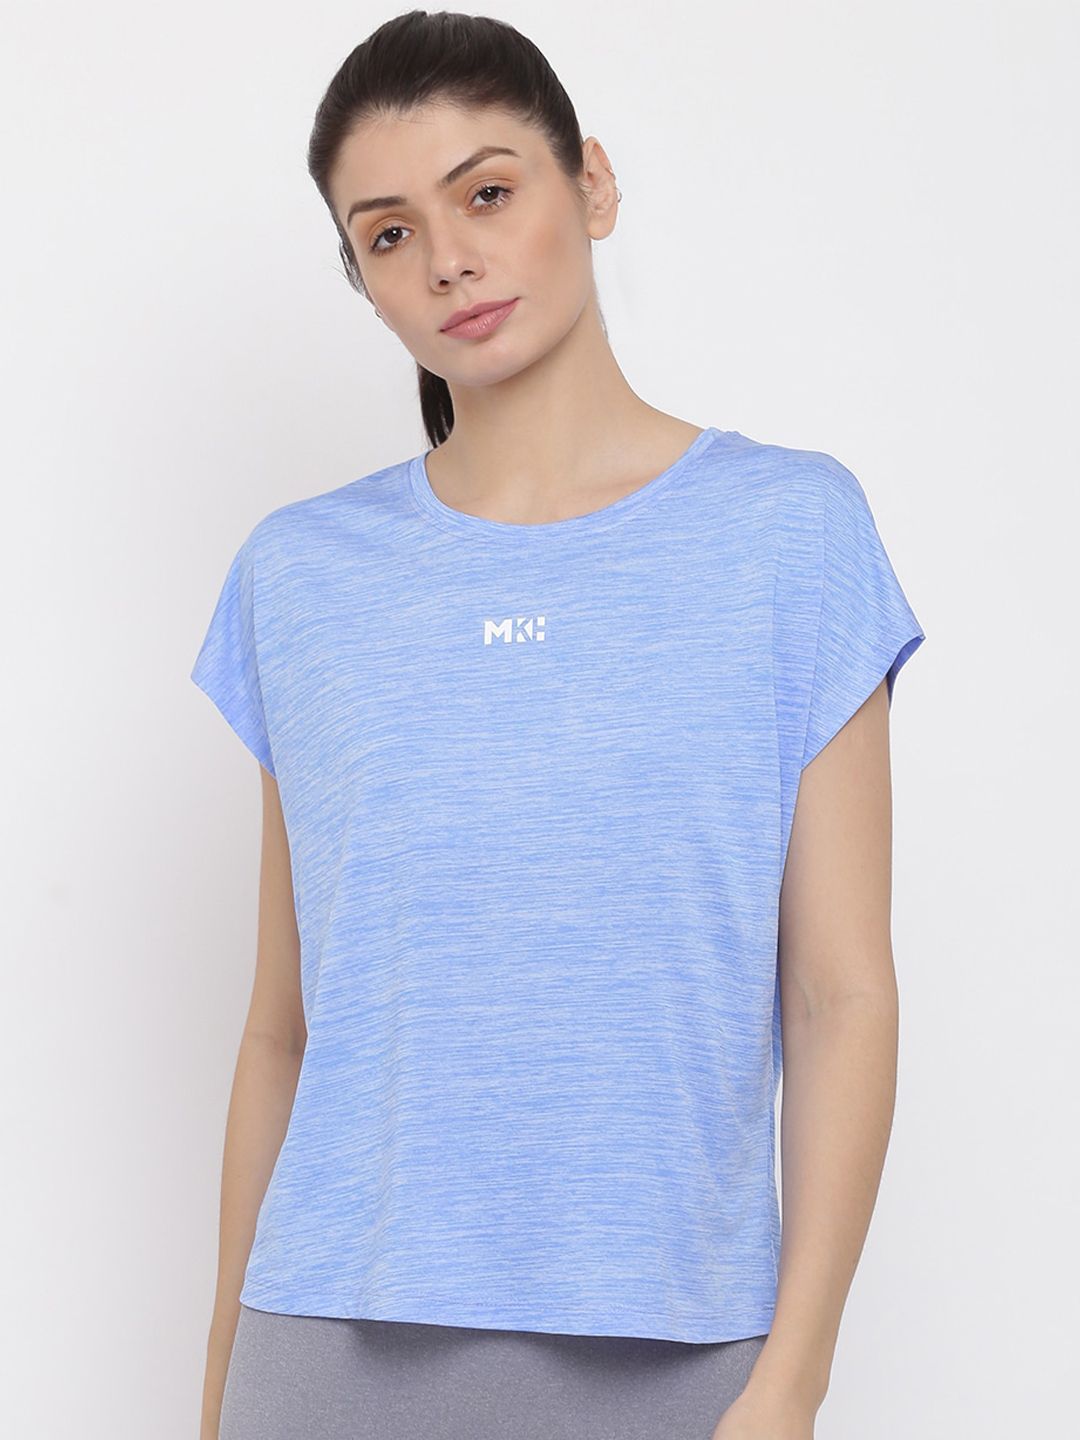 MKH Women Blue Extended Sleeves Dri-FIT T-shirt Price in India